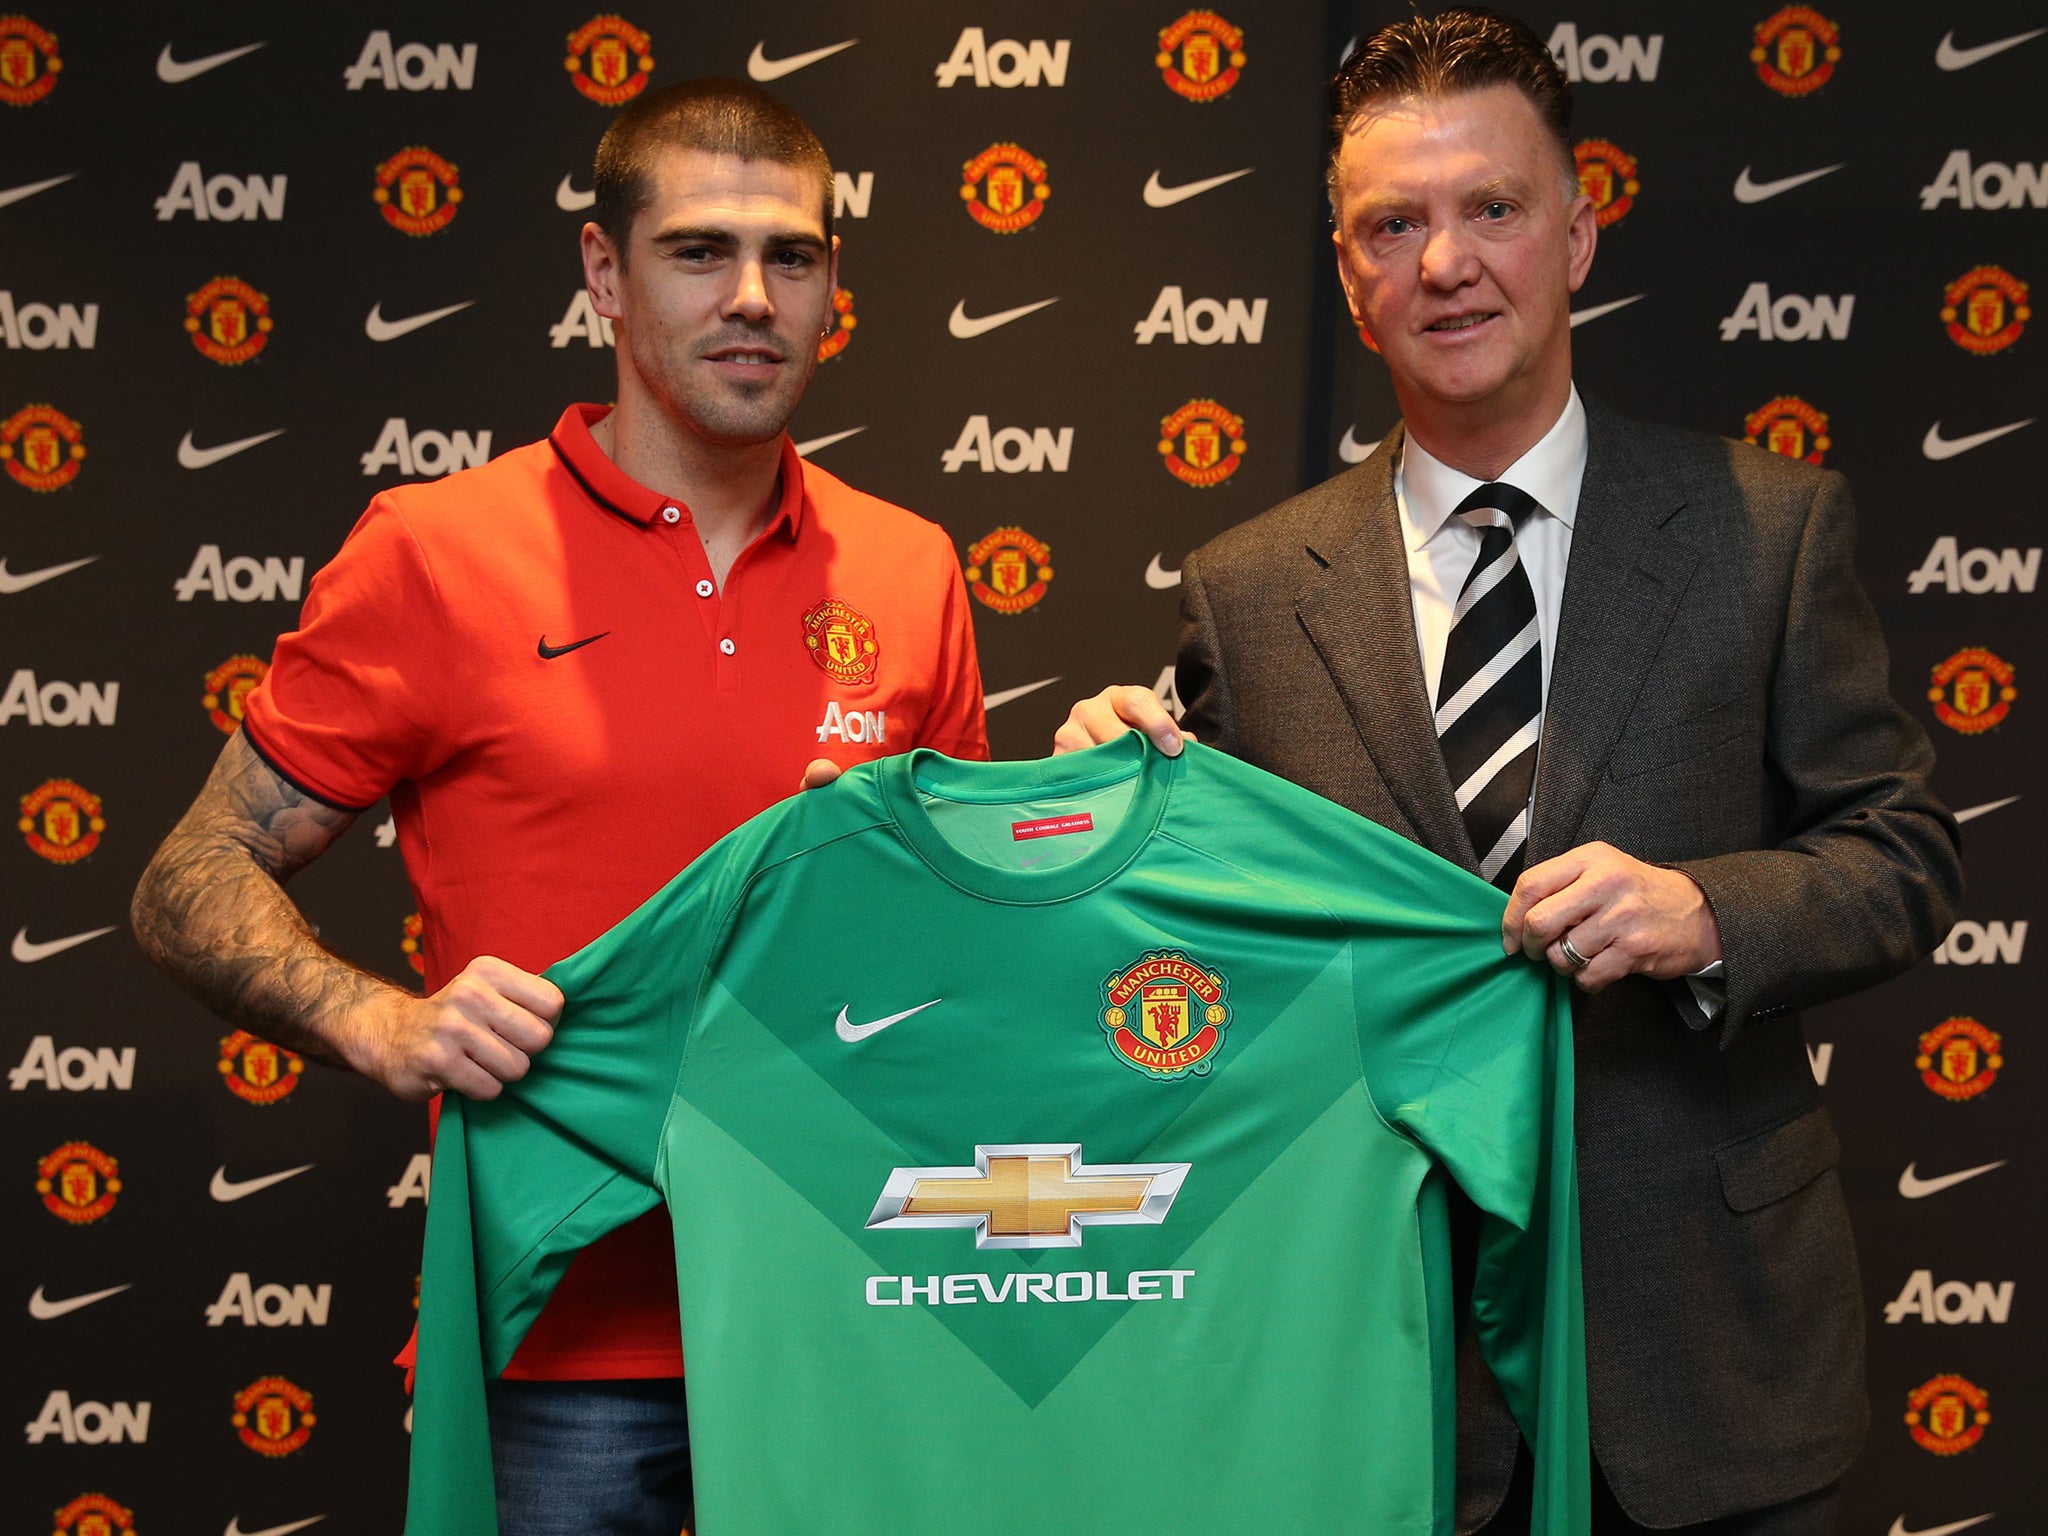 Valdes has joined United